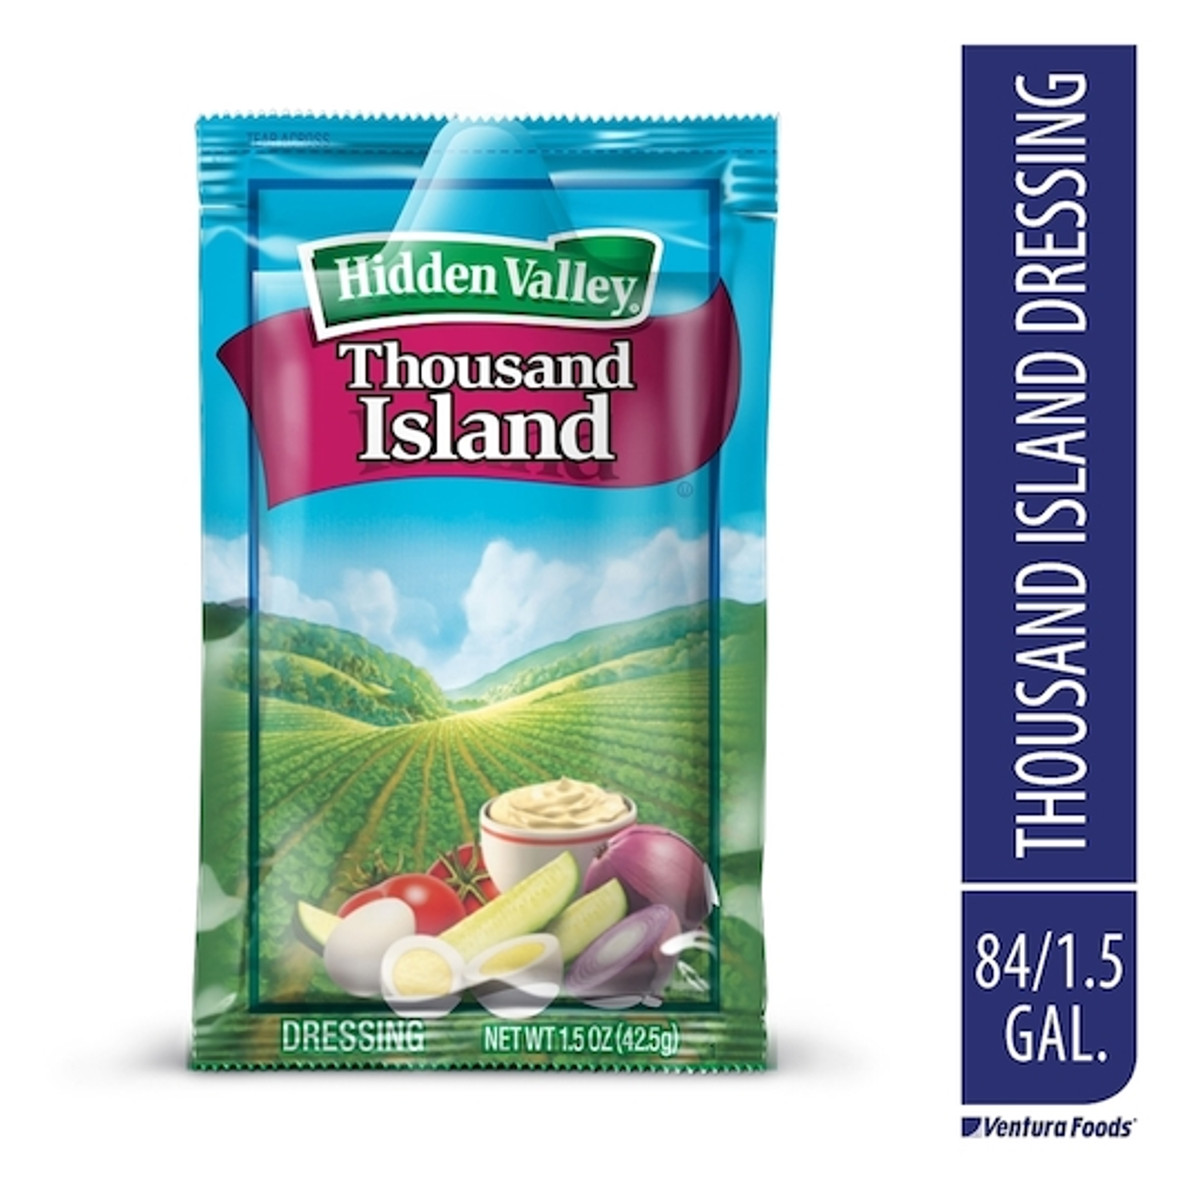 Hidden Valley Thick And Creamy Thousand Island Dressing Single Serve, 1.5 Ounce, 84 Per Case